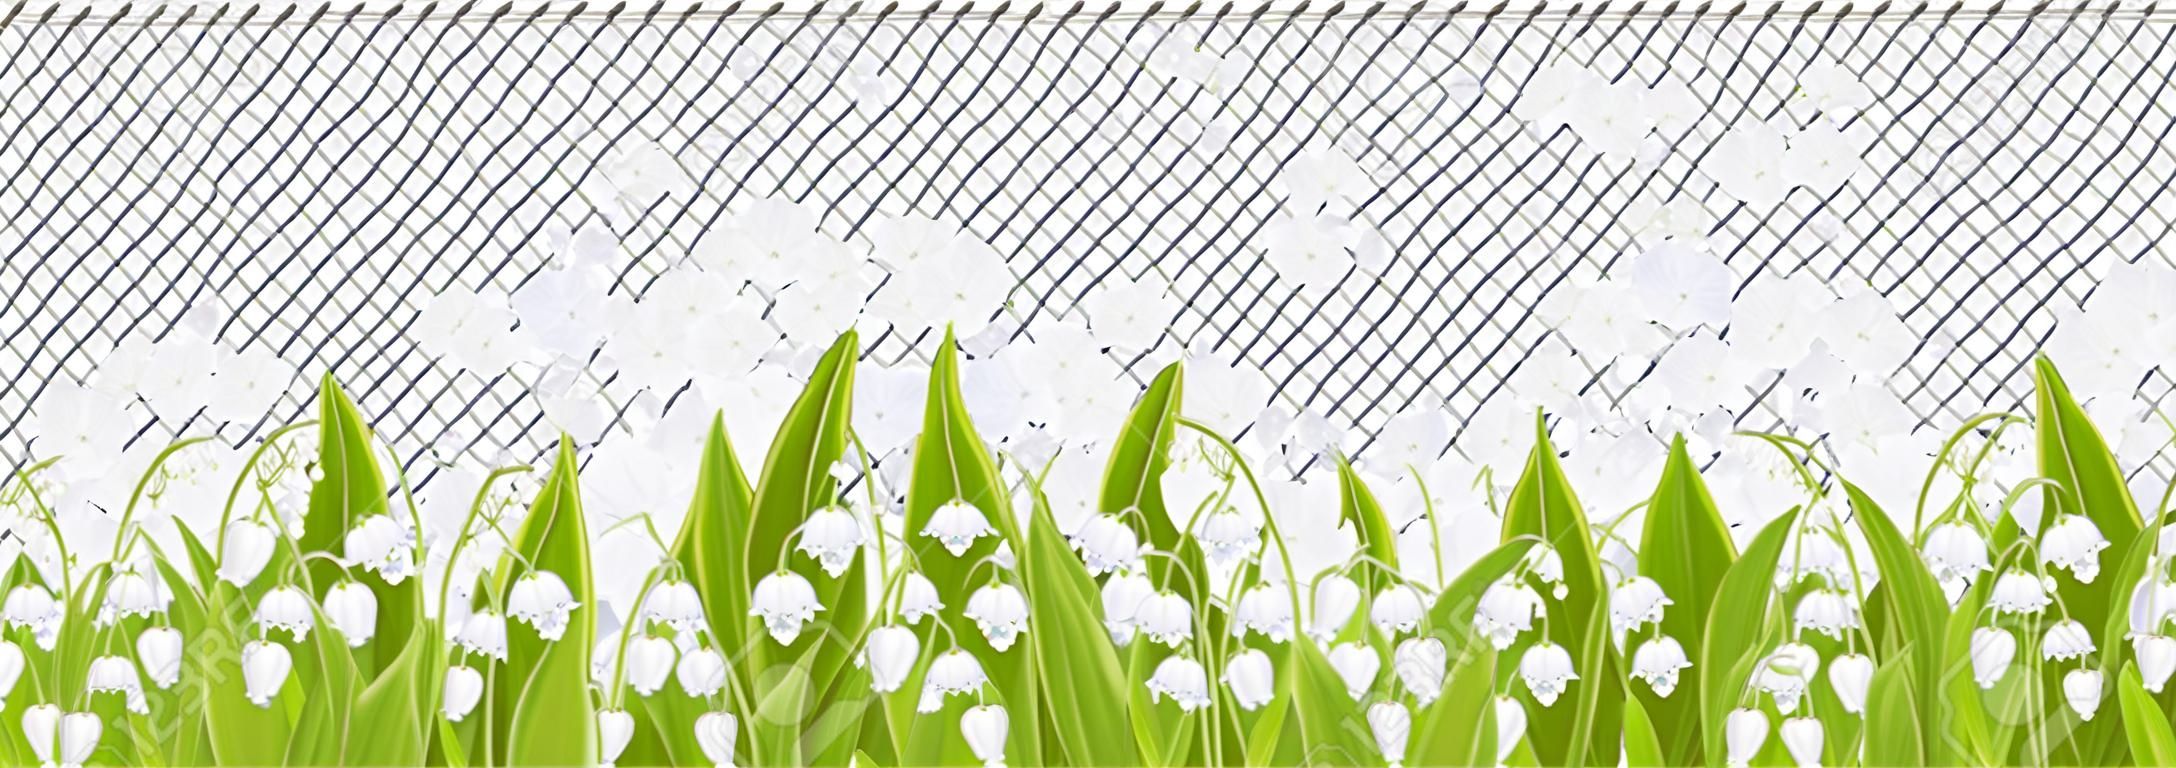 Seamless border with tender spring flowers lily of the valley, floral banner, frame, vector illustration. White buds forest flower bluebell, green stalks and leaves isolated on transparent background